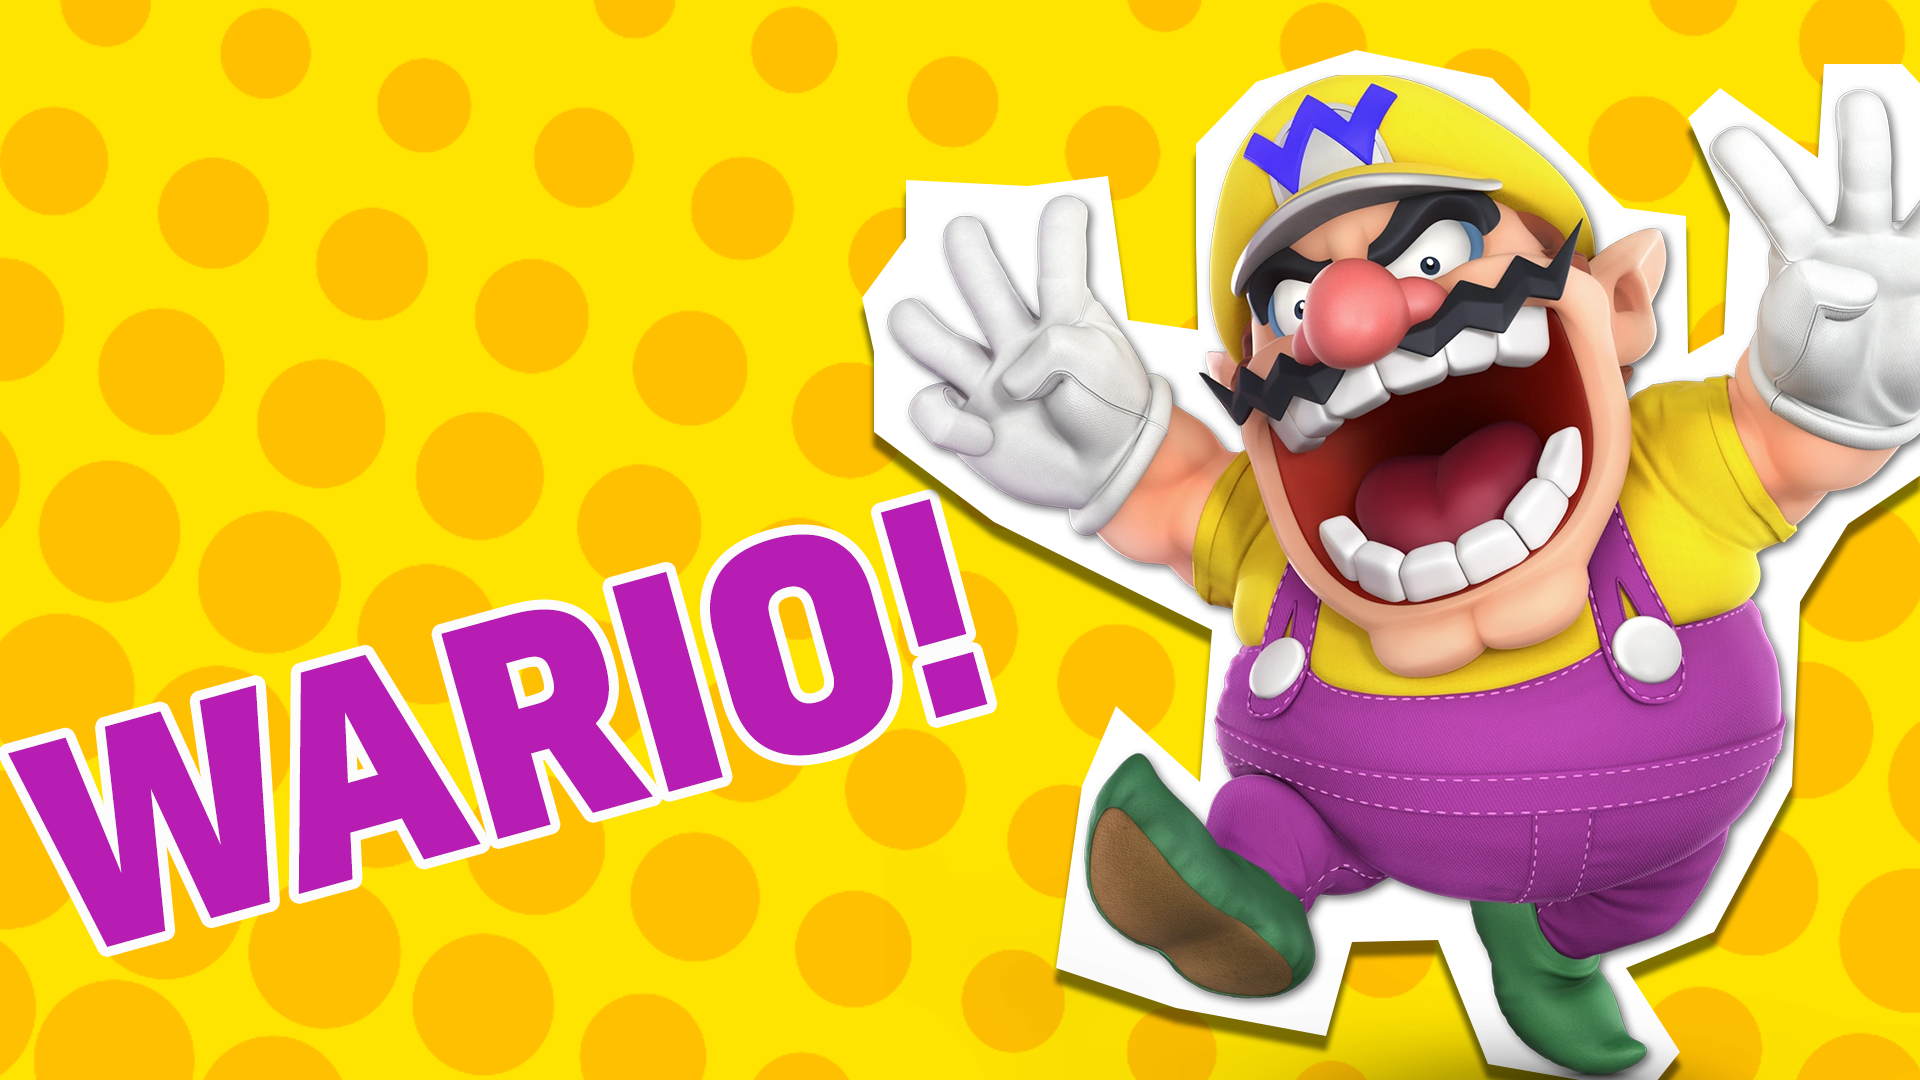 You're more Wario! You prefer to look out for yourself and you LOVE garlic (well, someone has to!). You don't mind a few underhanded tactics to get what you want either!